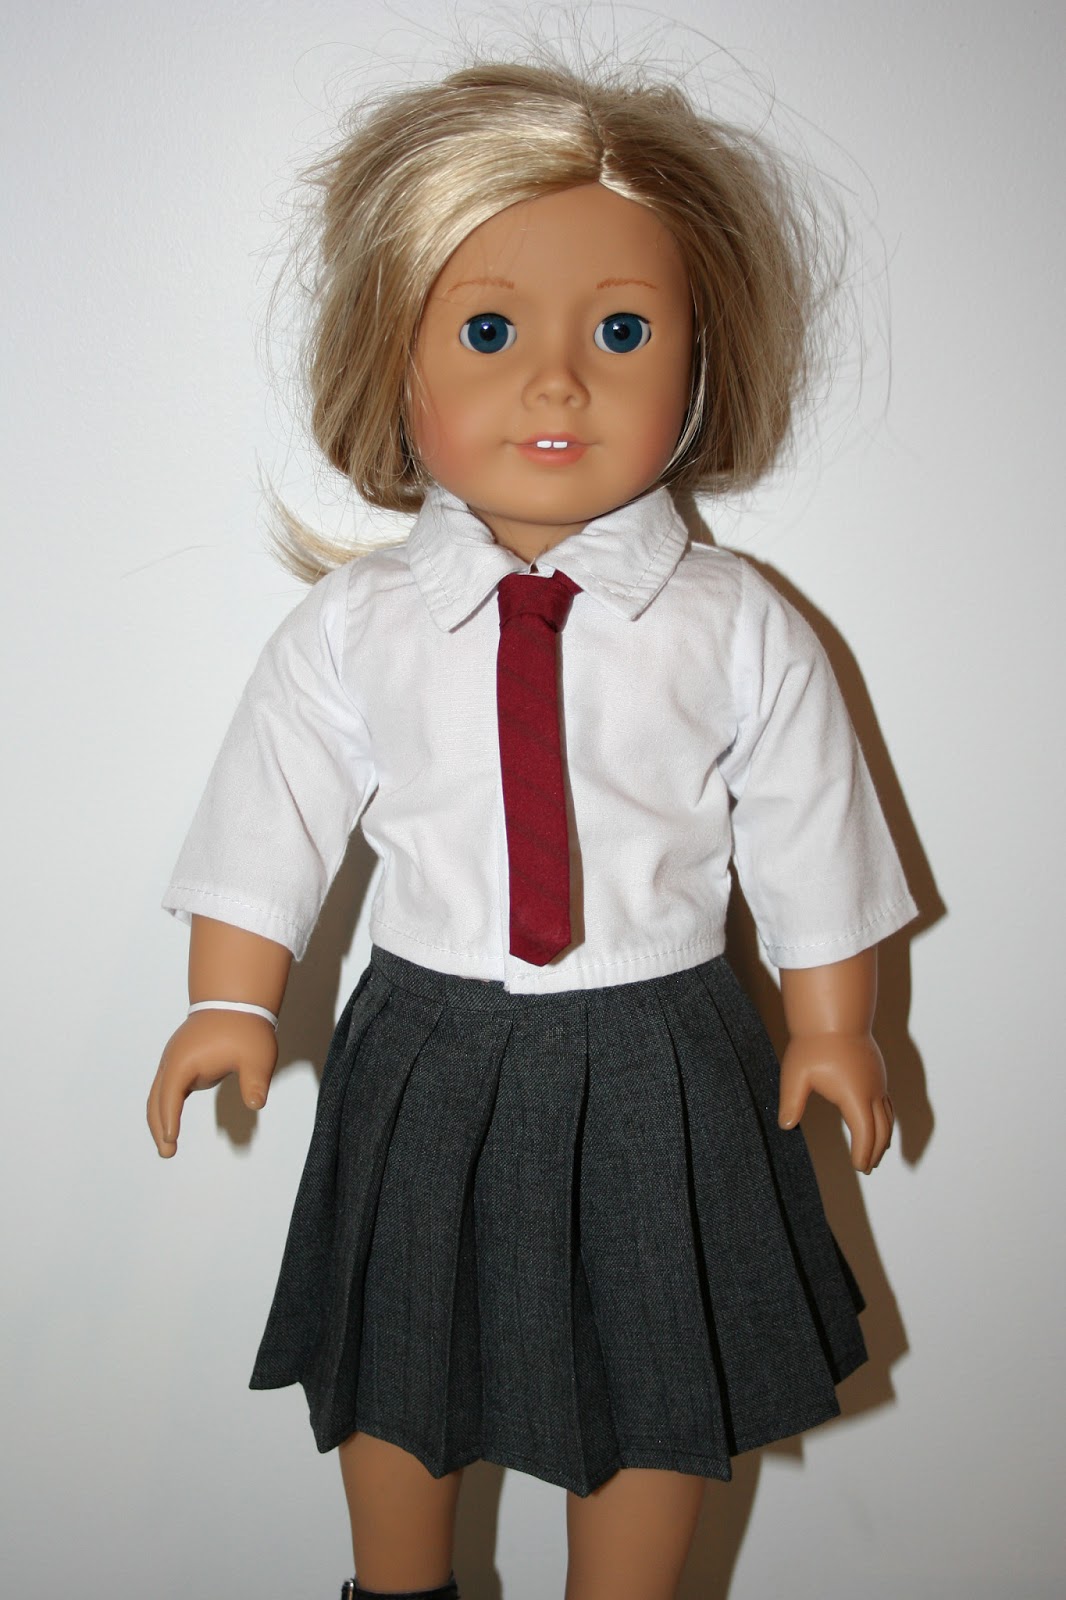 arts-and-crafts-for-your-american-girl-doll-harry-potter-tie-for